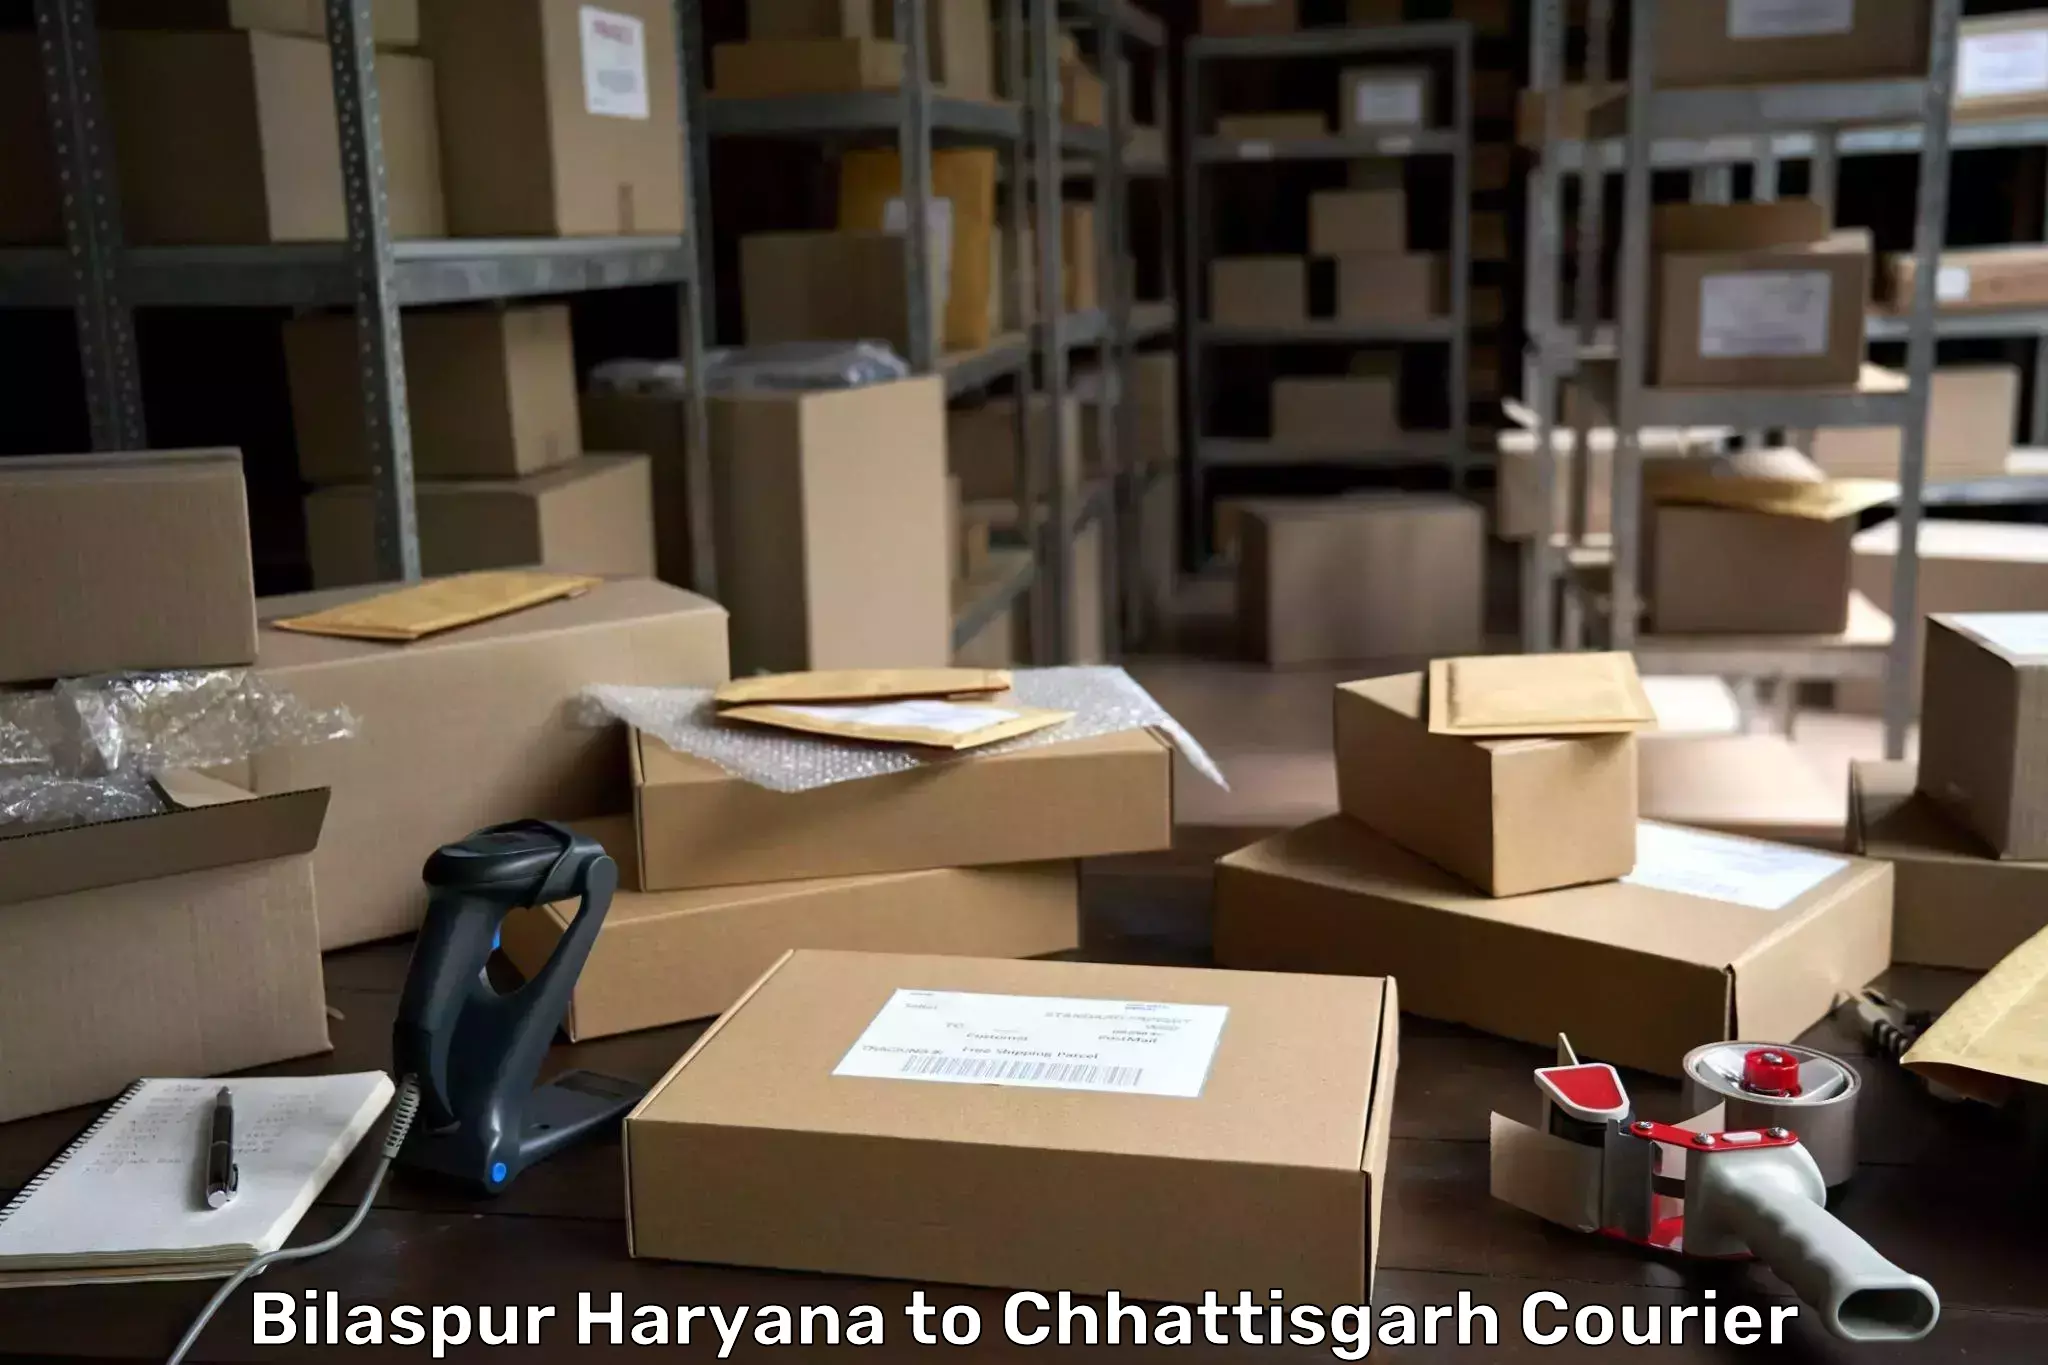 State-of-the-art courier technology in Bilaspur Haryana to Chhattisgarh